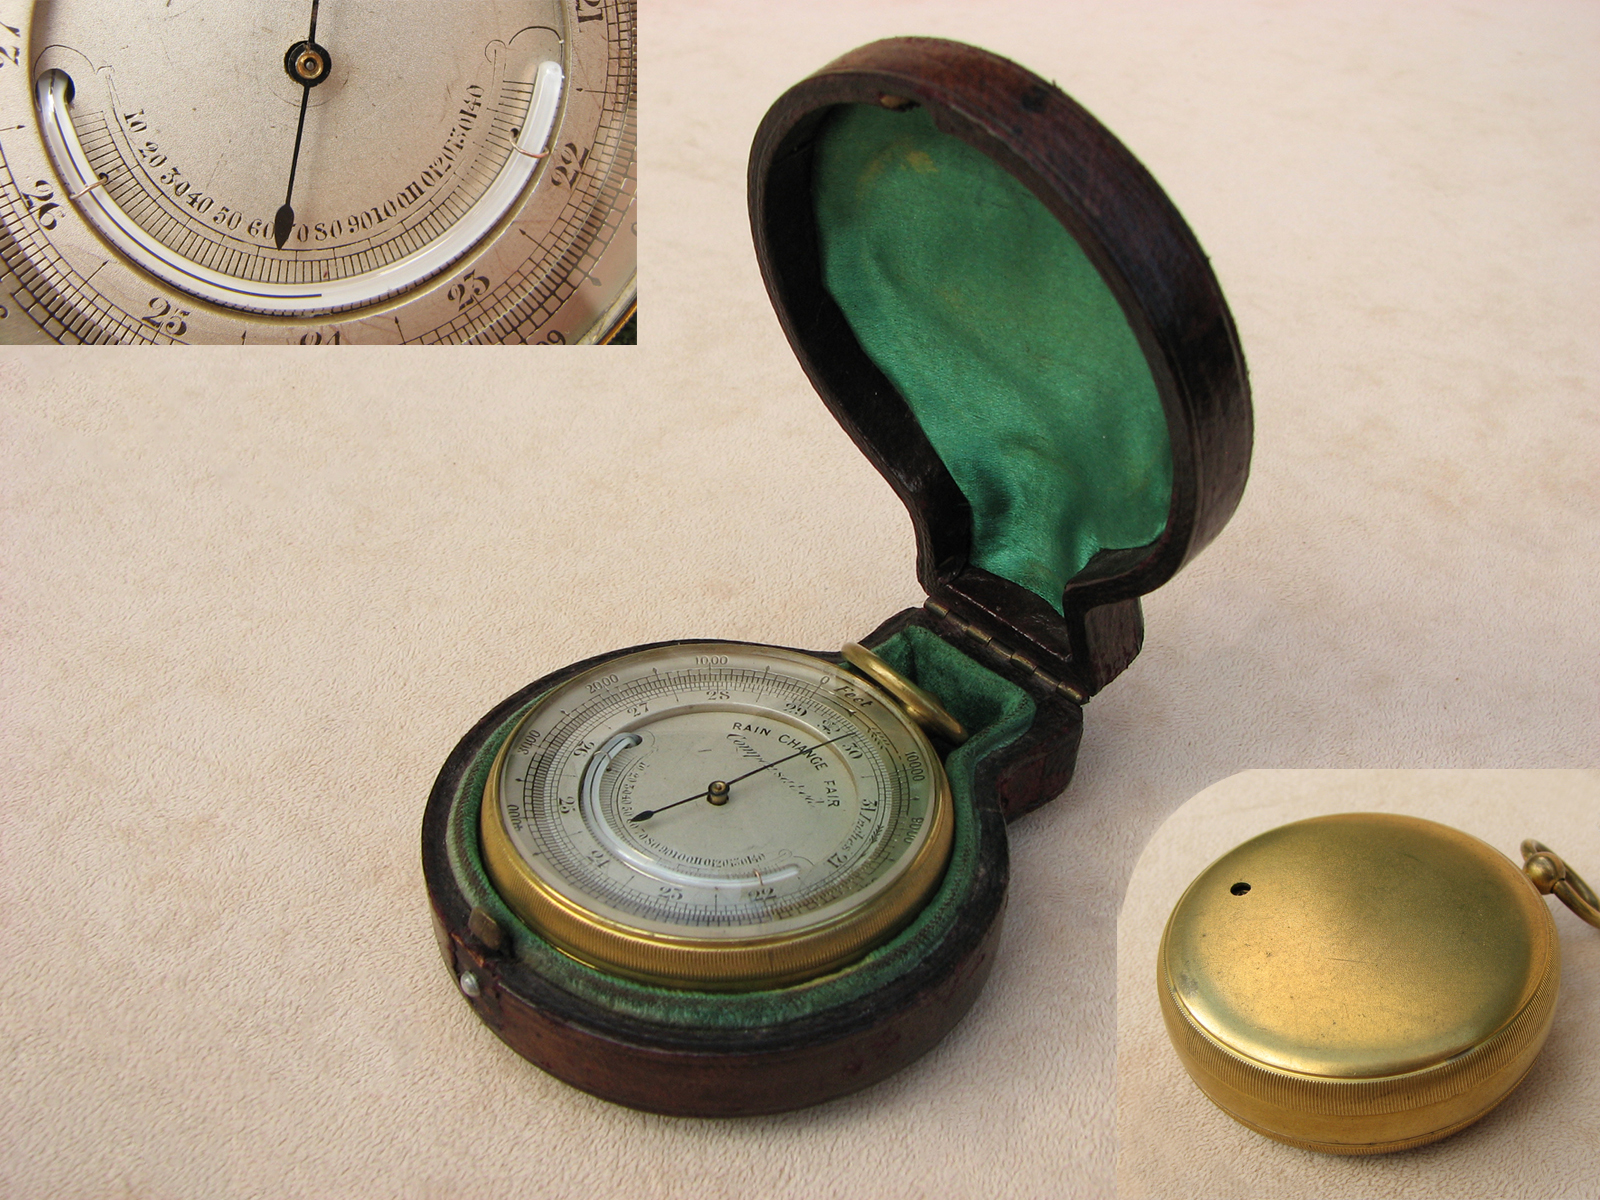 19th century pocket barometer & altimeter with curved thermometer.